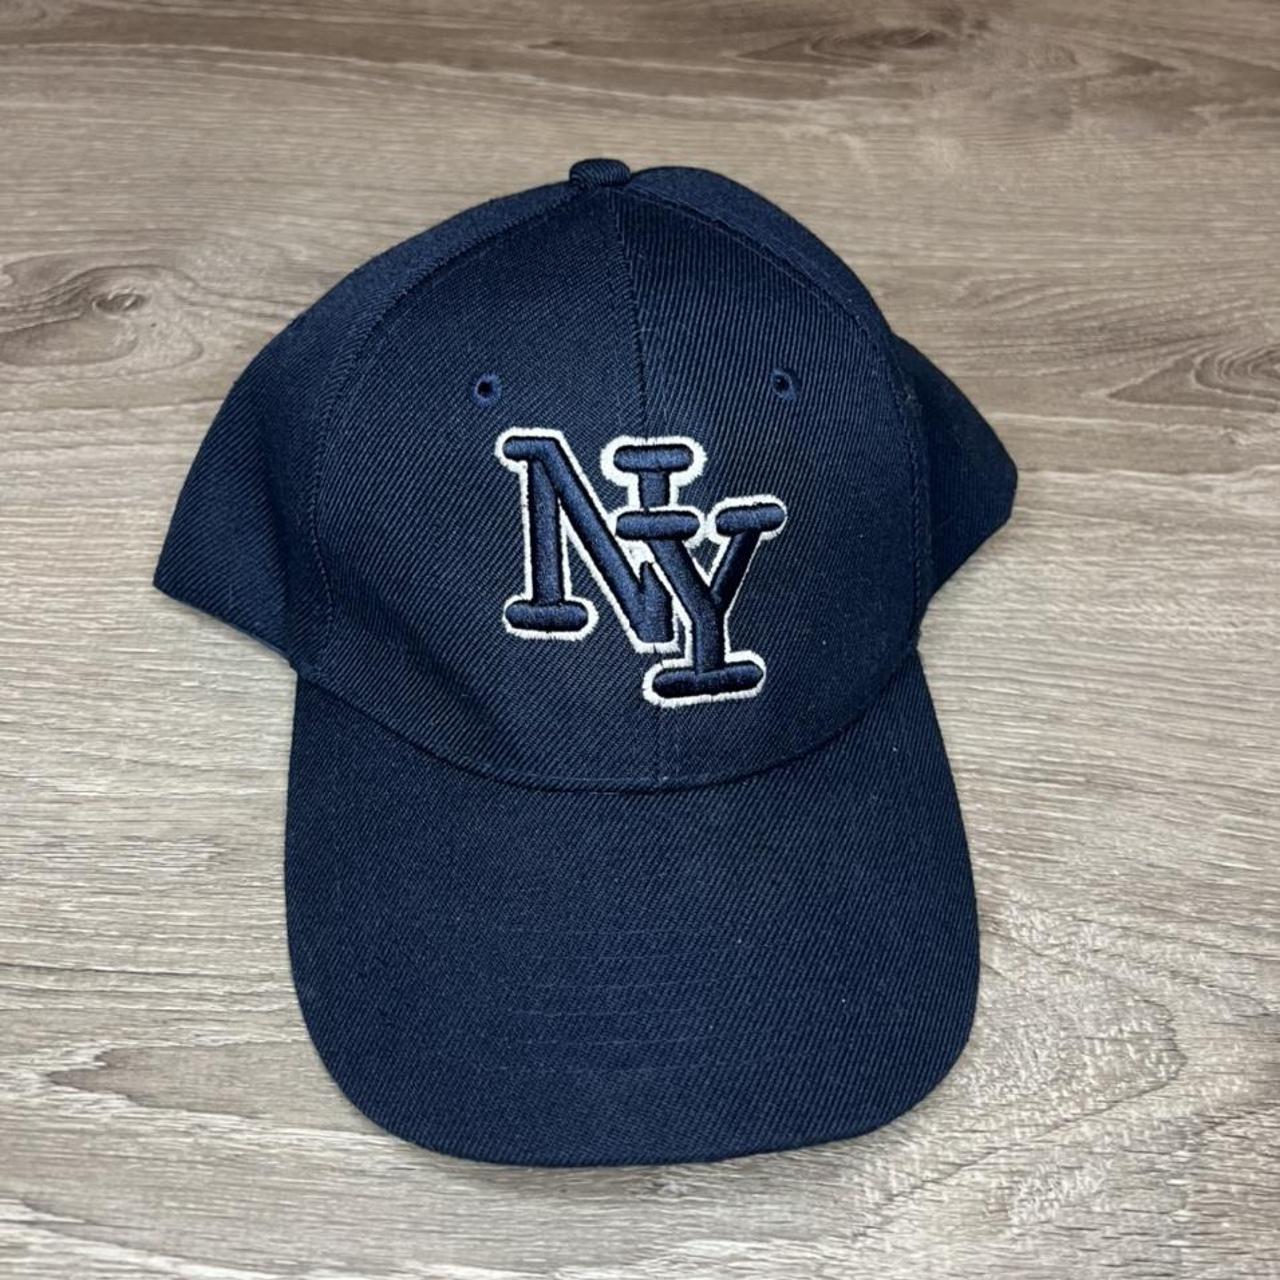 Brandy Melville Women's Navy and White Hat